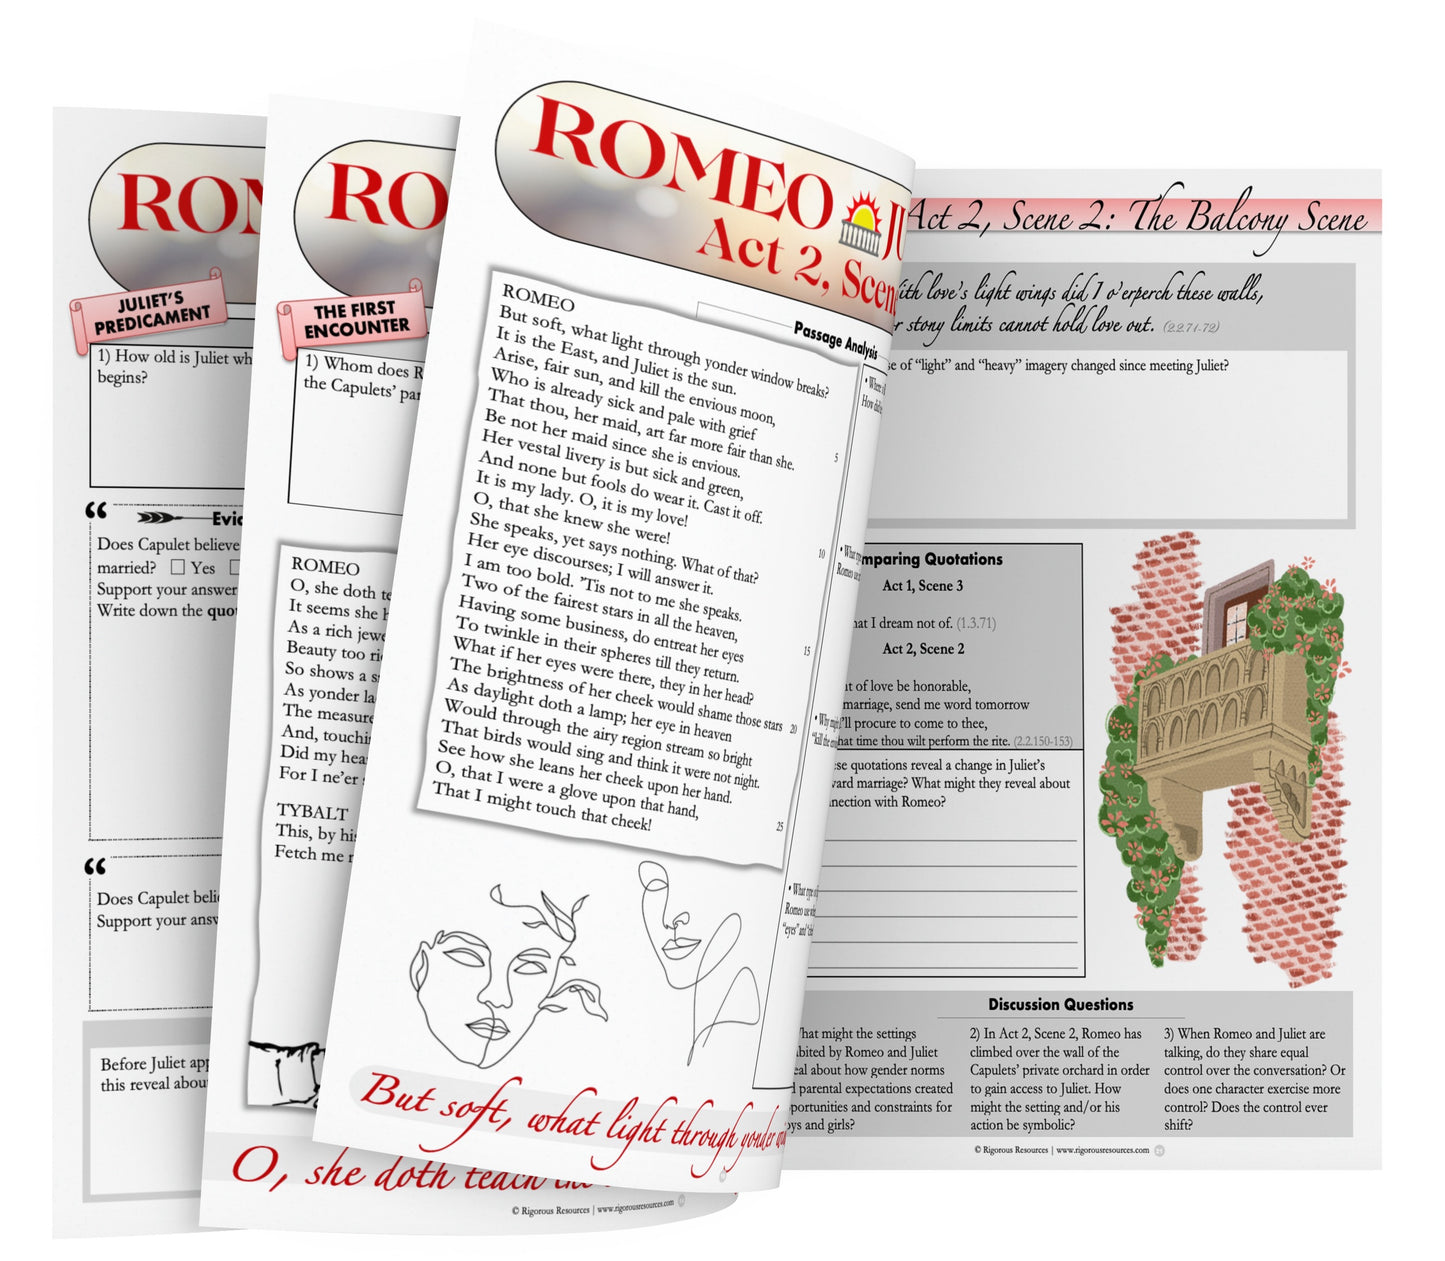 Romeo and Juliet | Complete Teaching Unit with Workbook & Answer Key